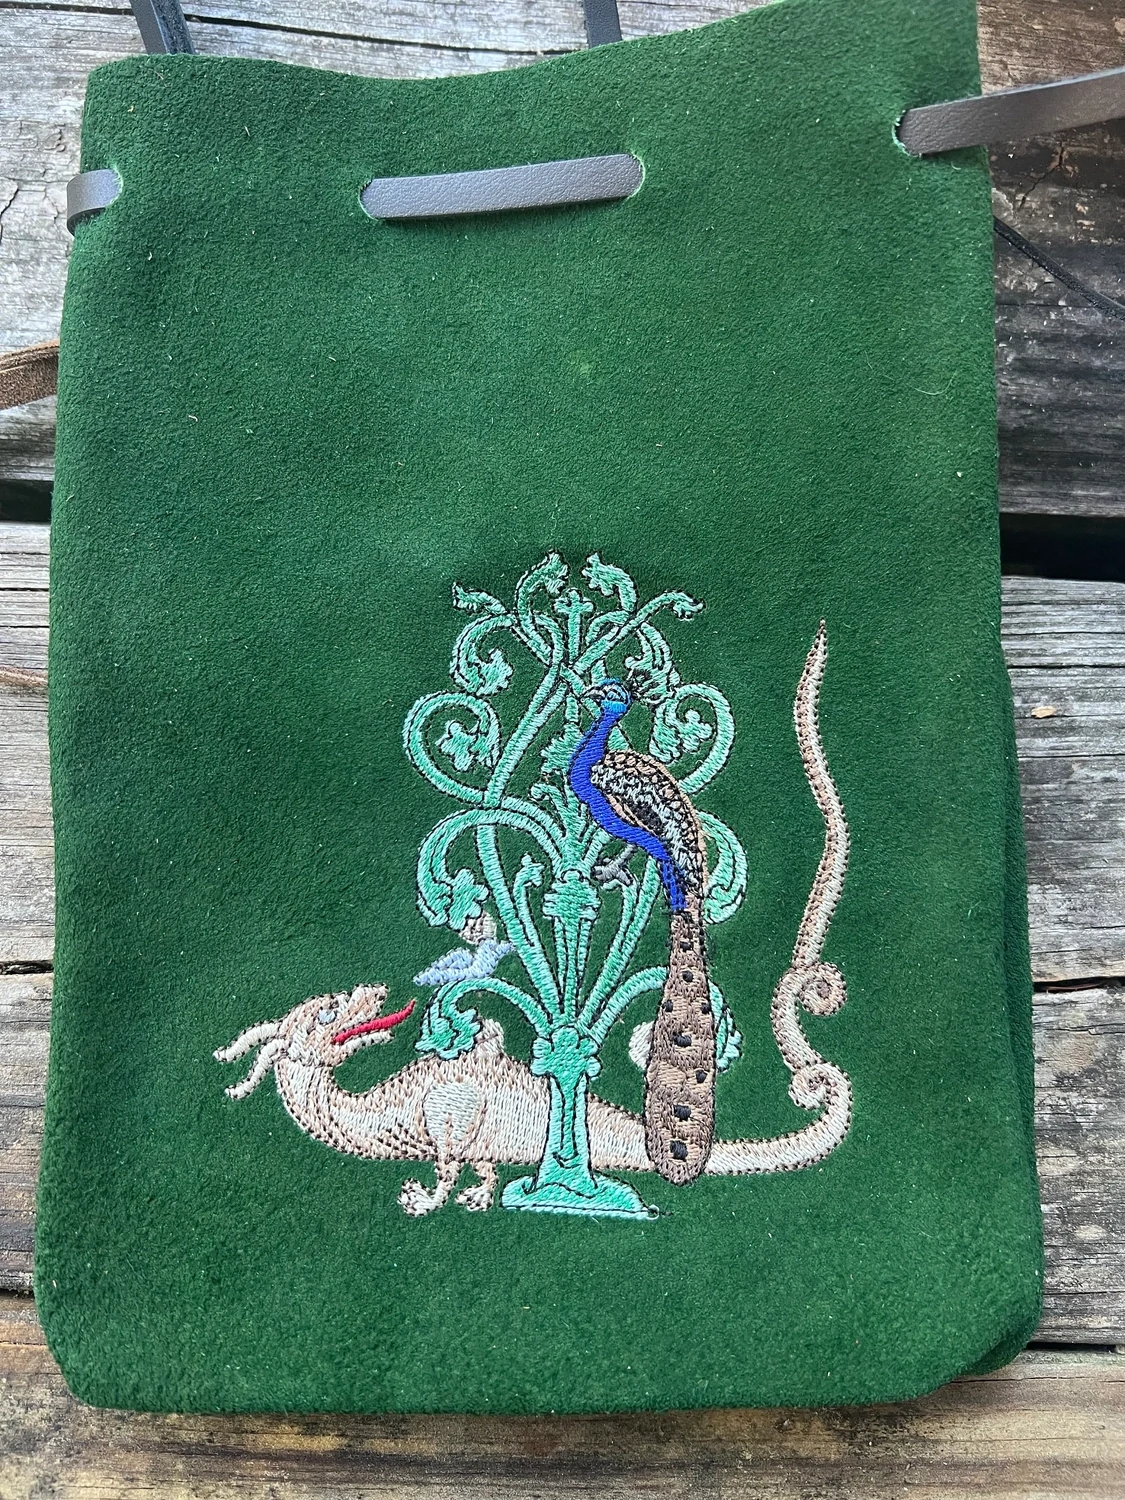 Suede Embroidered Suede Leather Bag 8.5x6 - Serpent and Peacock in a Tree